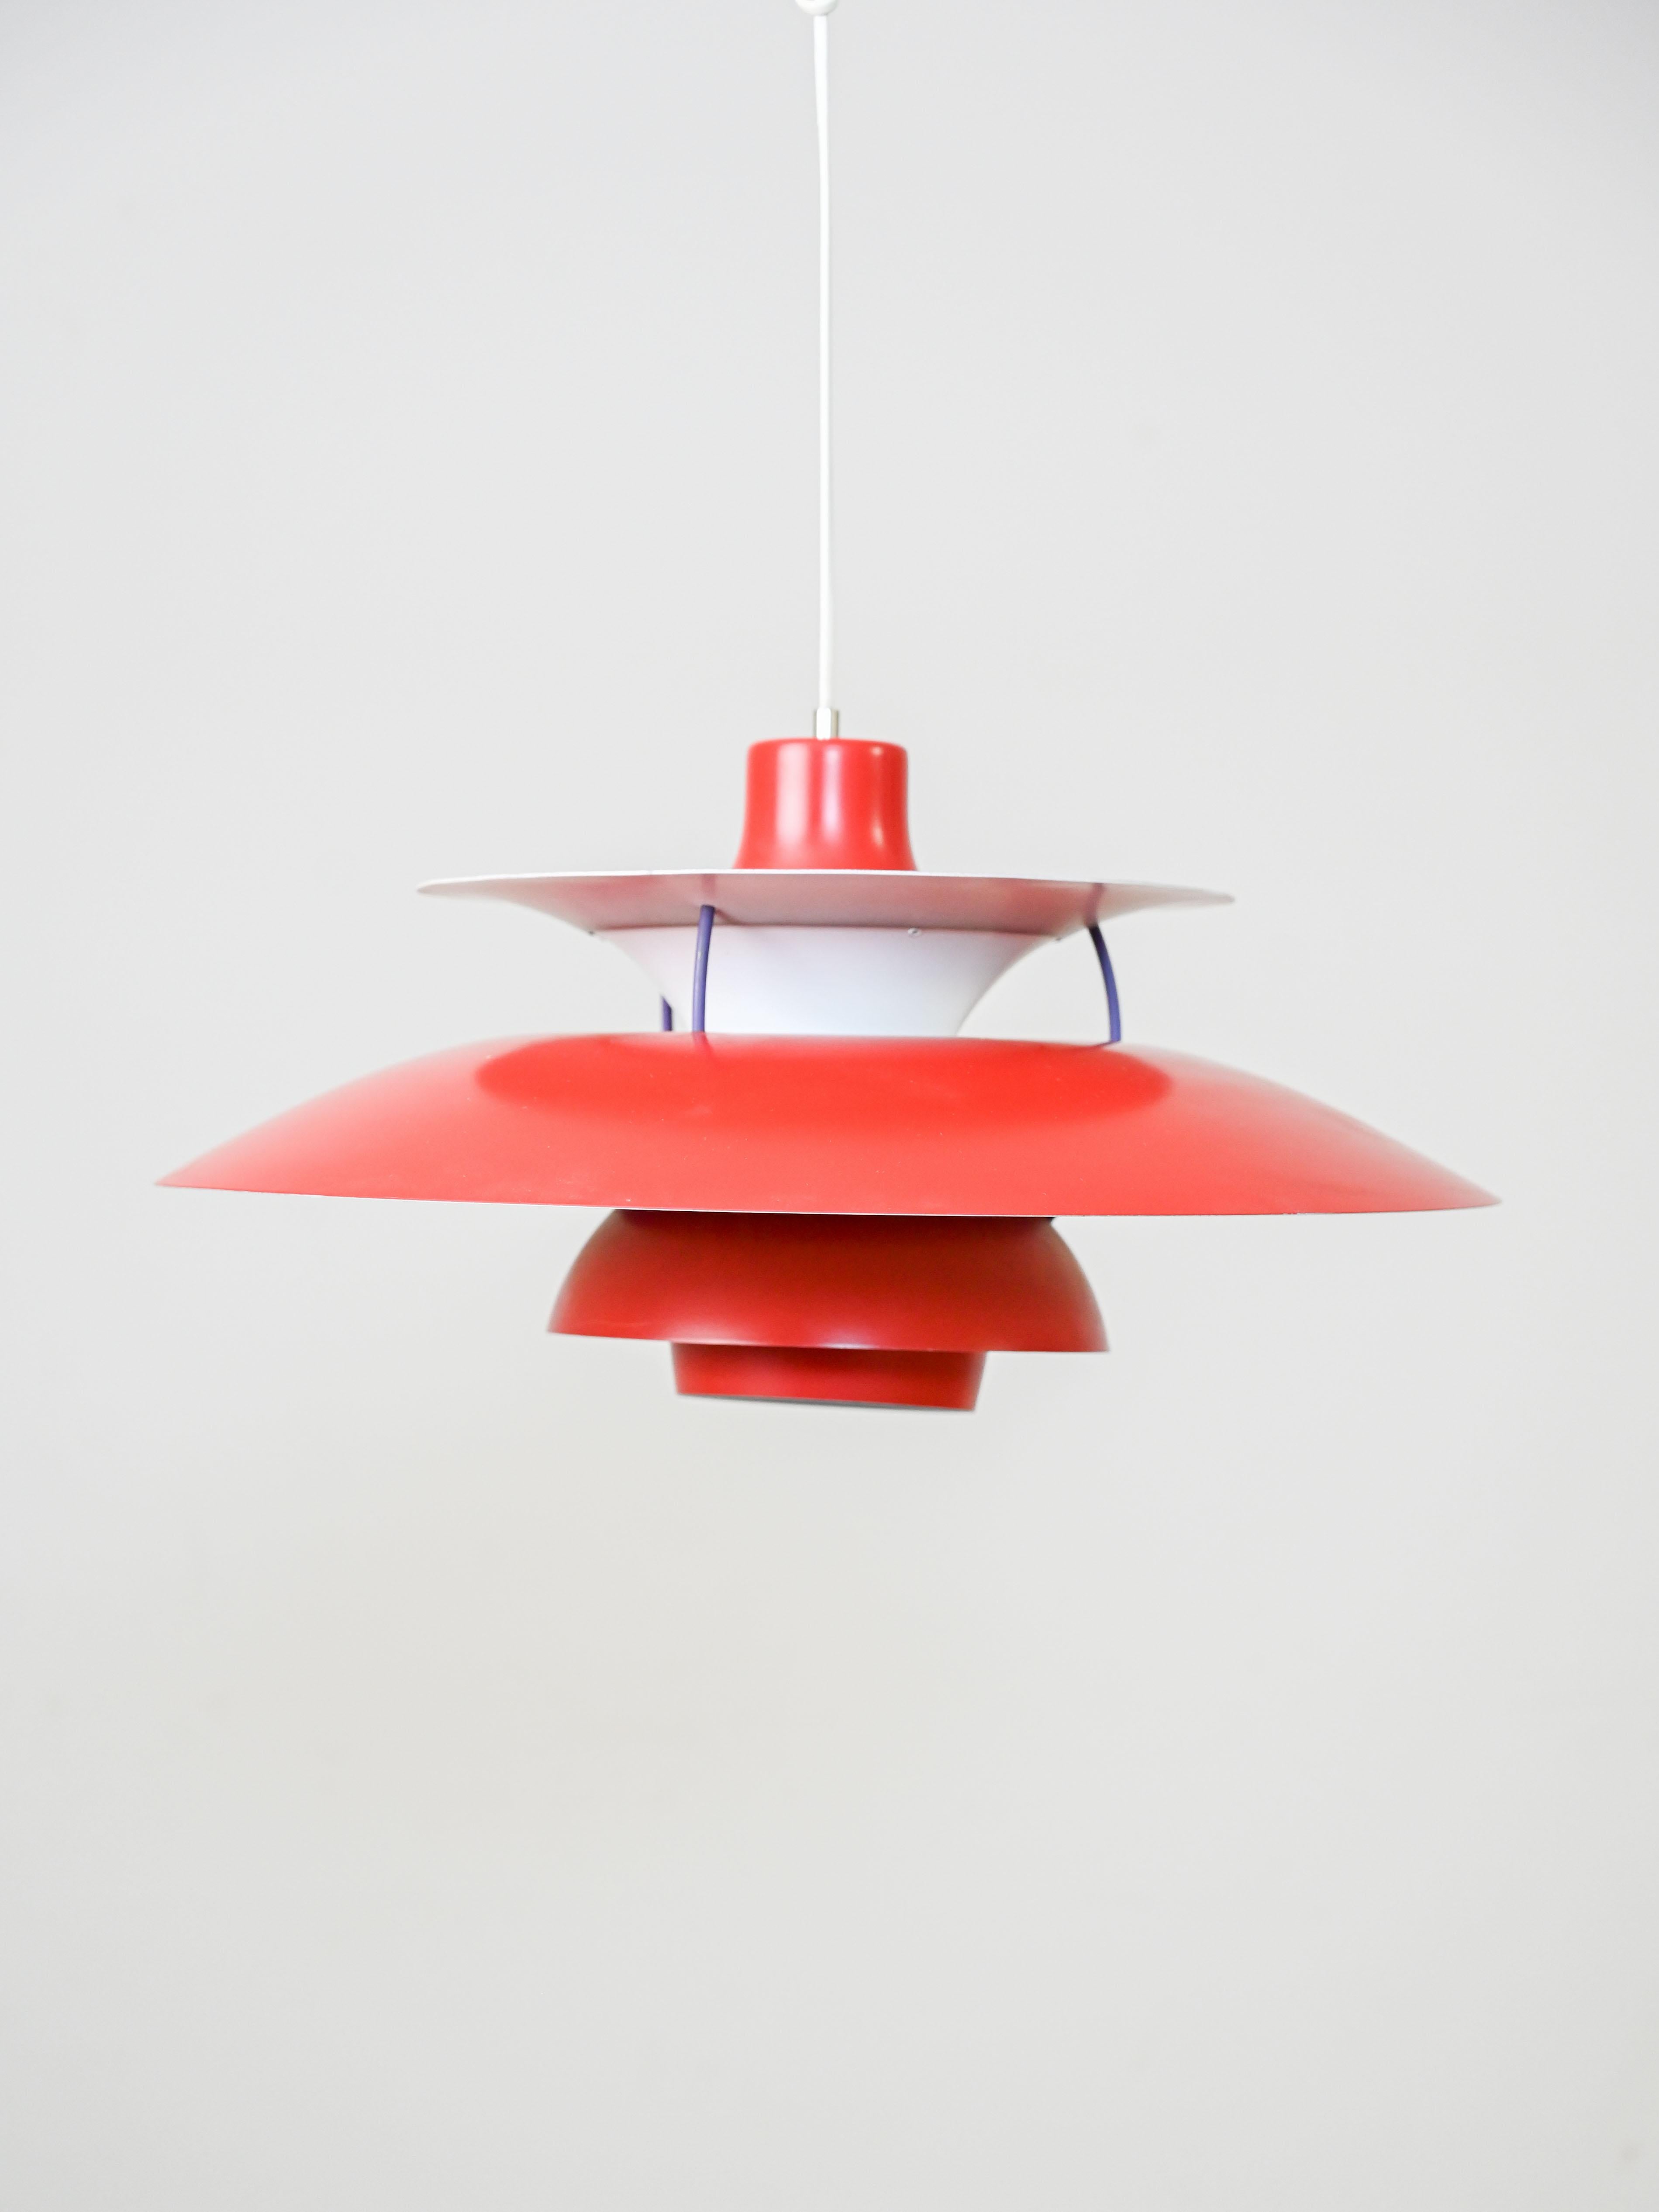 Suspension lamp model PH5, designed by Poul Henningsen for Louis Poulsen in 1958.

The innovative structure, consisting of several reflective lampshades joined together, makes it possible to recreate diffuse, anti-glare lighting.
The name PH5